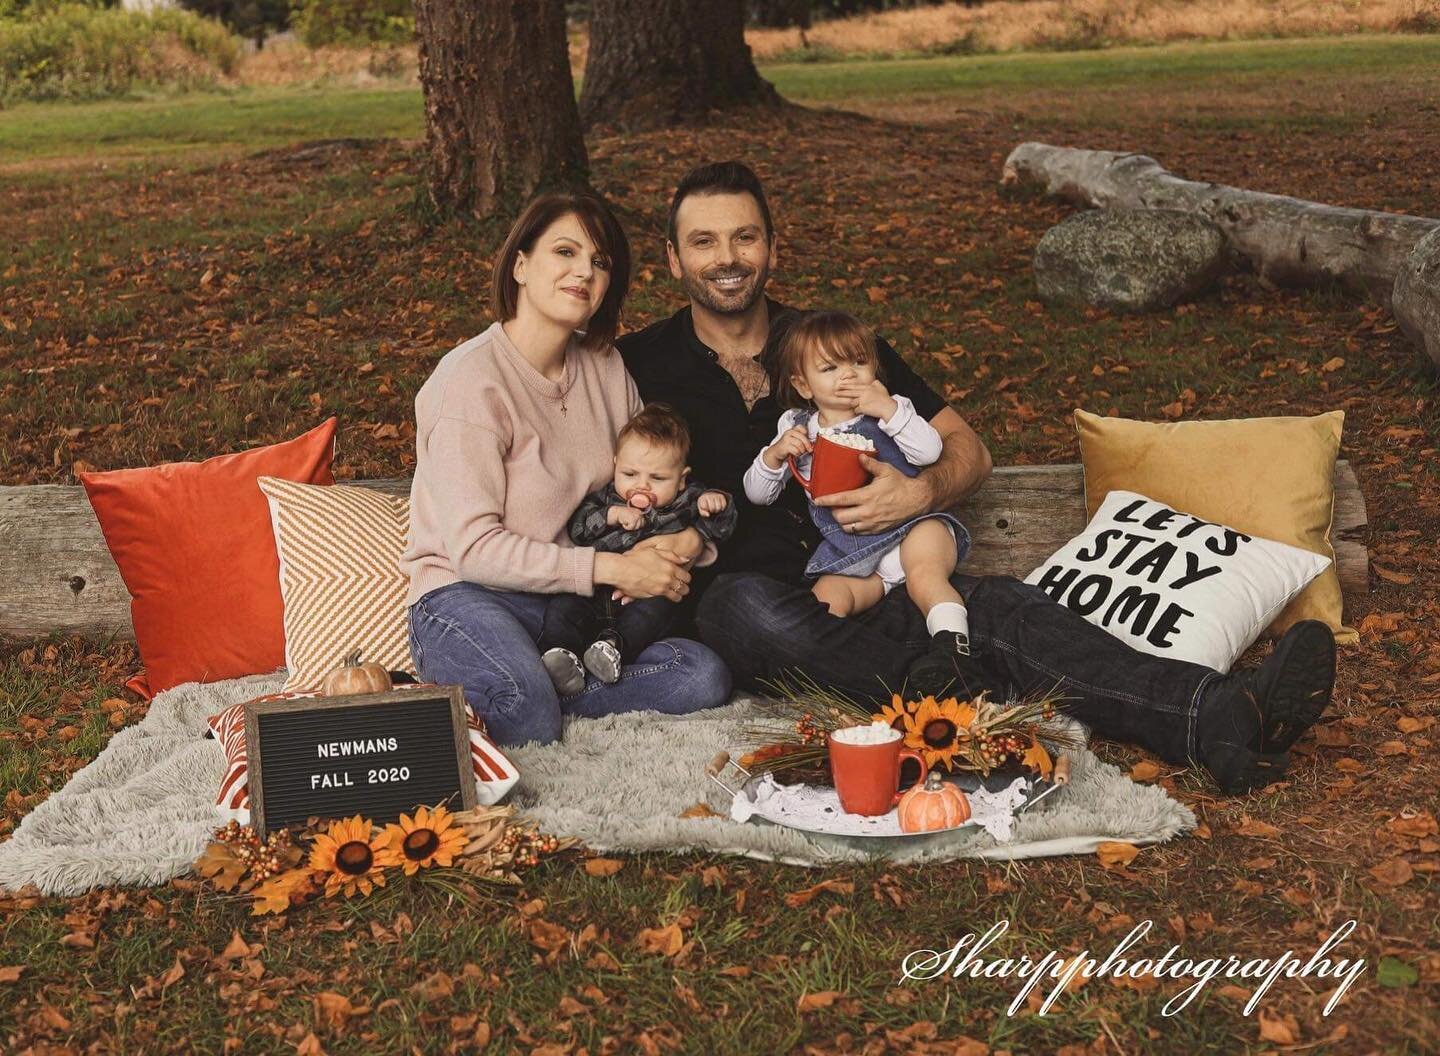 𝕋𝕙𝕖 ℕ𝕖𝕨𝕞𝕒𝕟&rsquo;𝕤 𝕗𝕒𝕝𝕝 𝟚𝟘𝟚𝟘
.
.
.
#fallphotography #fall #photography #photooftheday #family #familyphotography #familyportrait #fallfamilyphotos #sharpphotography #pictures #canadianphotographer #bcphotographer #vancouverphotograph